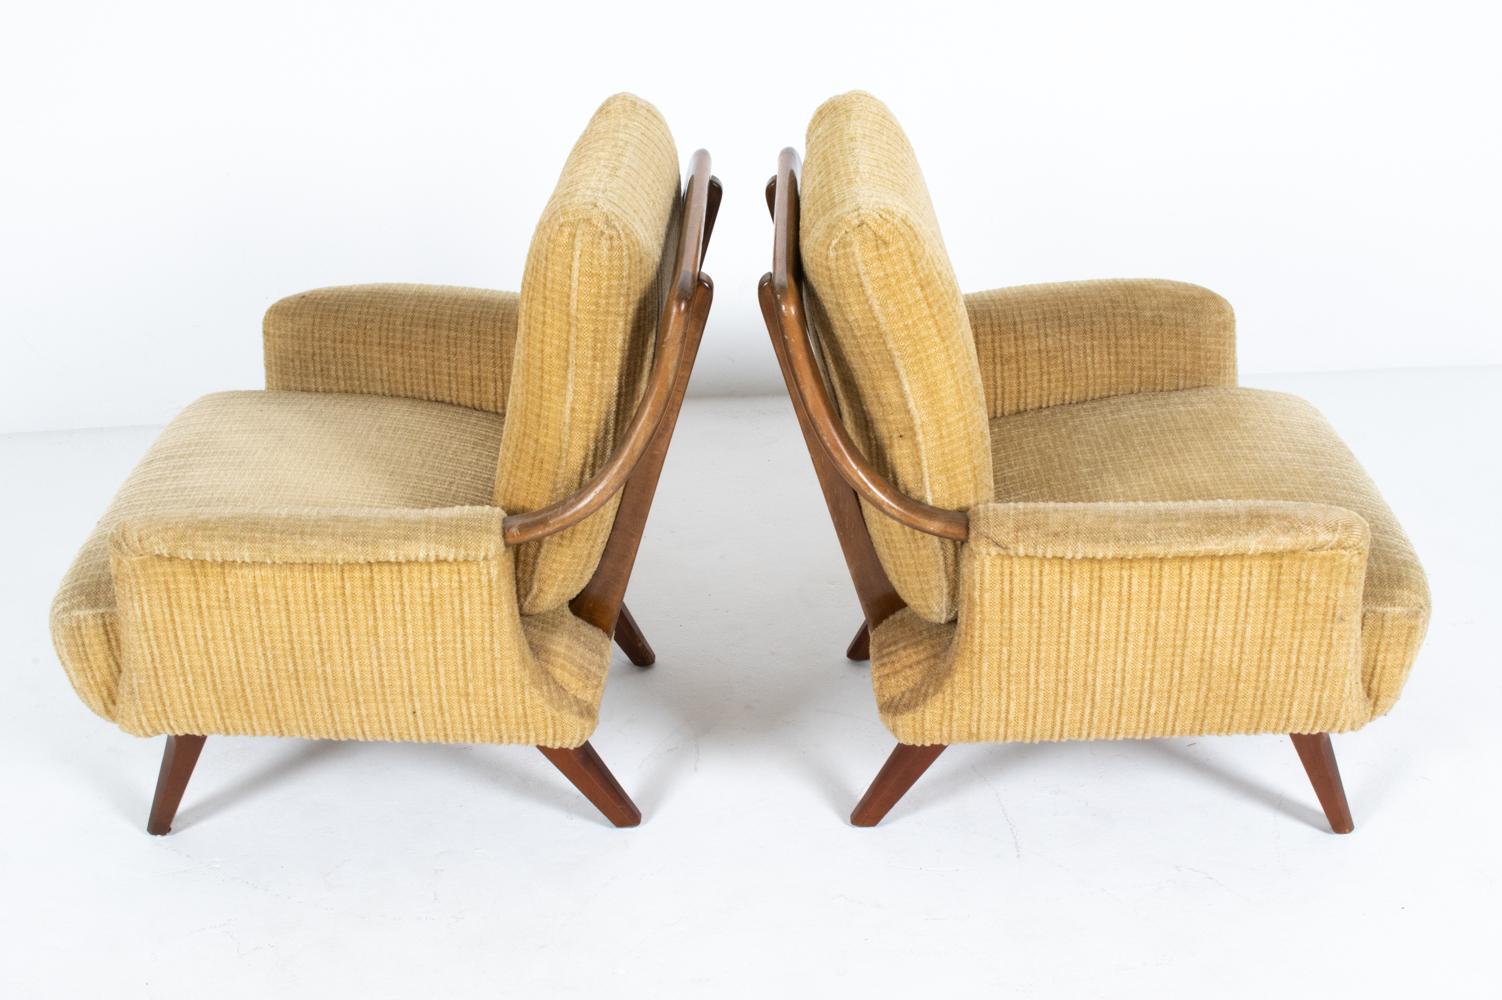 Pair of Scandinavian Mid-Century Lounge Chairs, c. 1950's For Sale 1